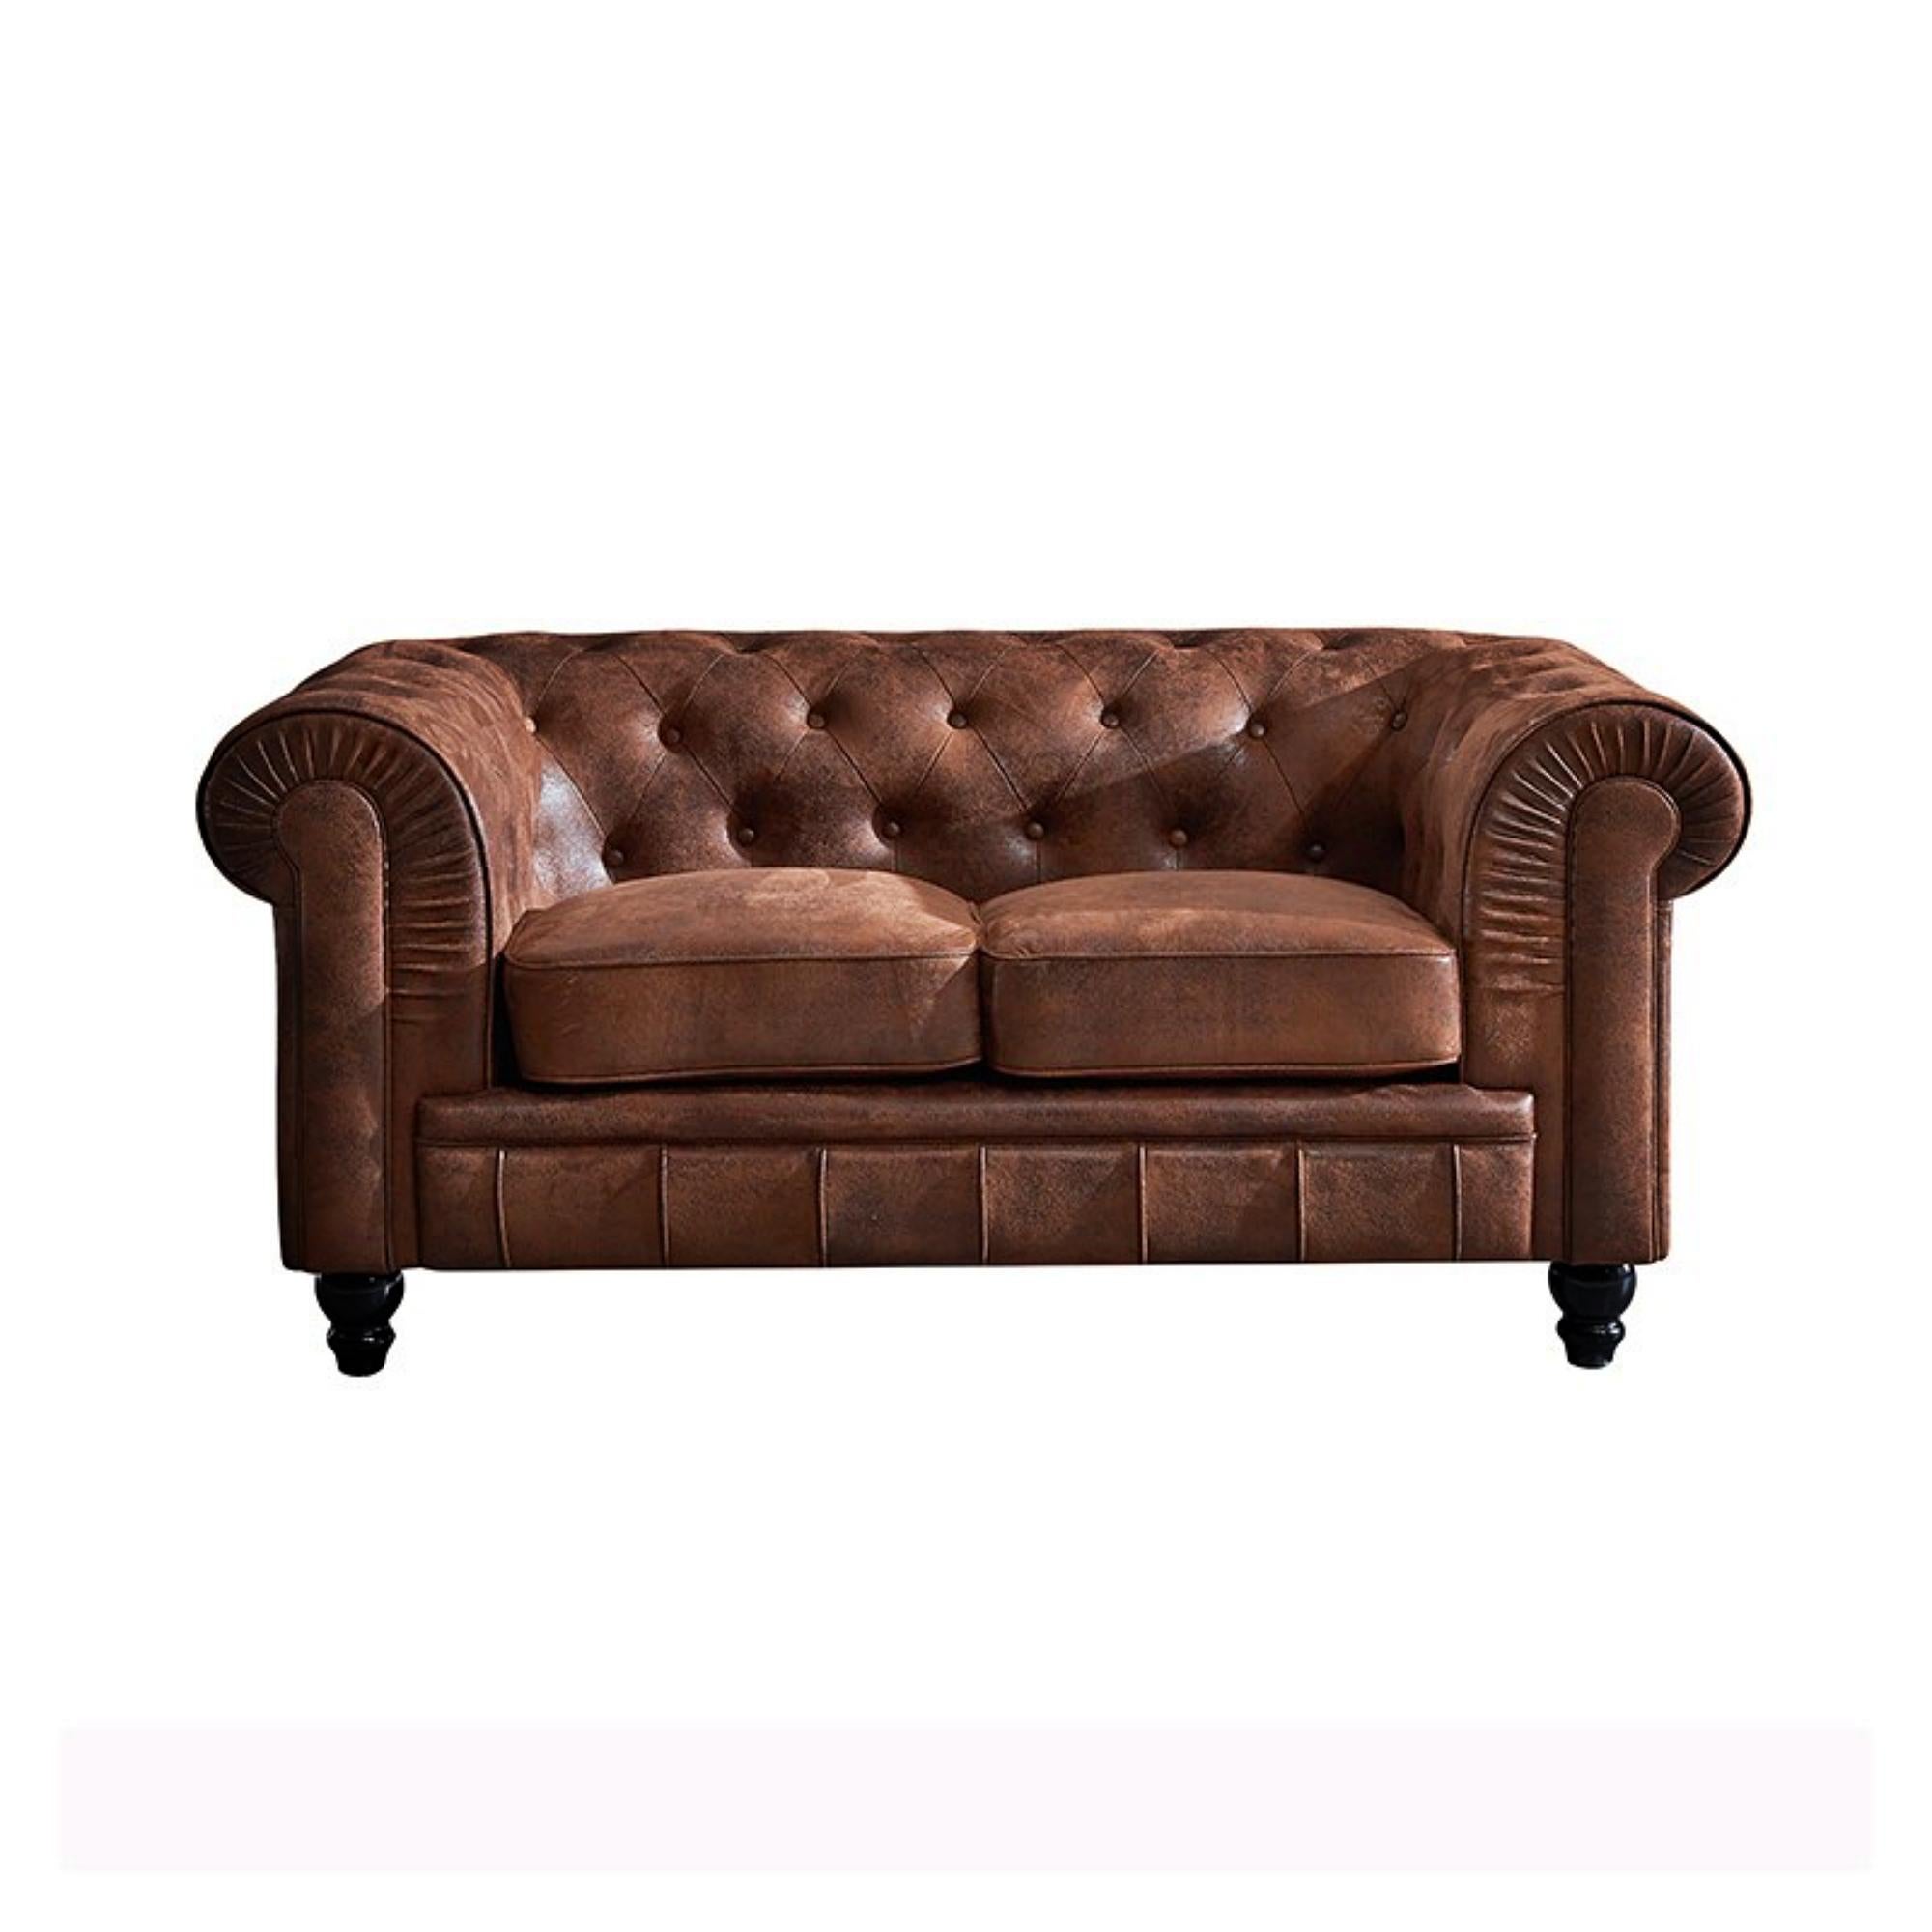 Hand-Crafted New 2 Seater Spanish Sofa Model Vintage For Sale